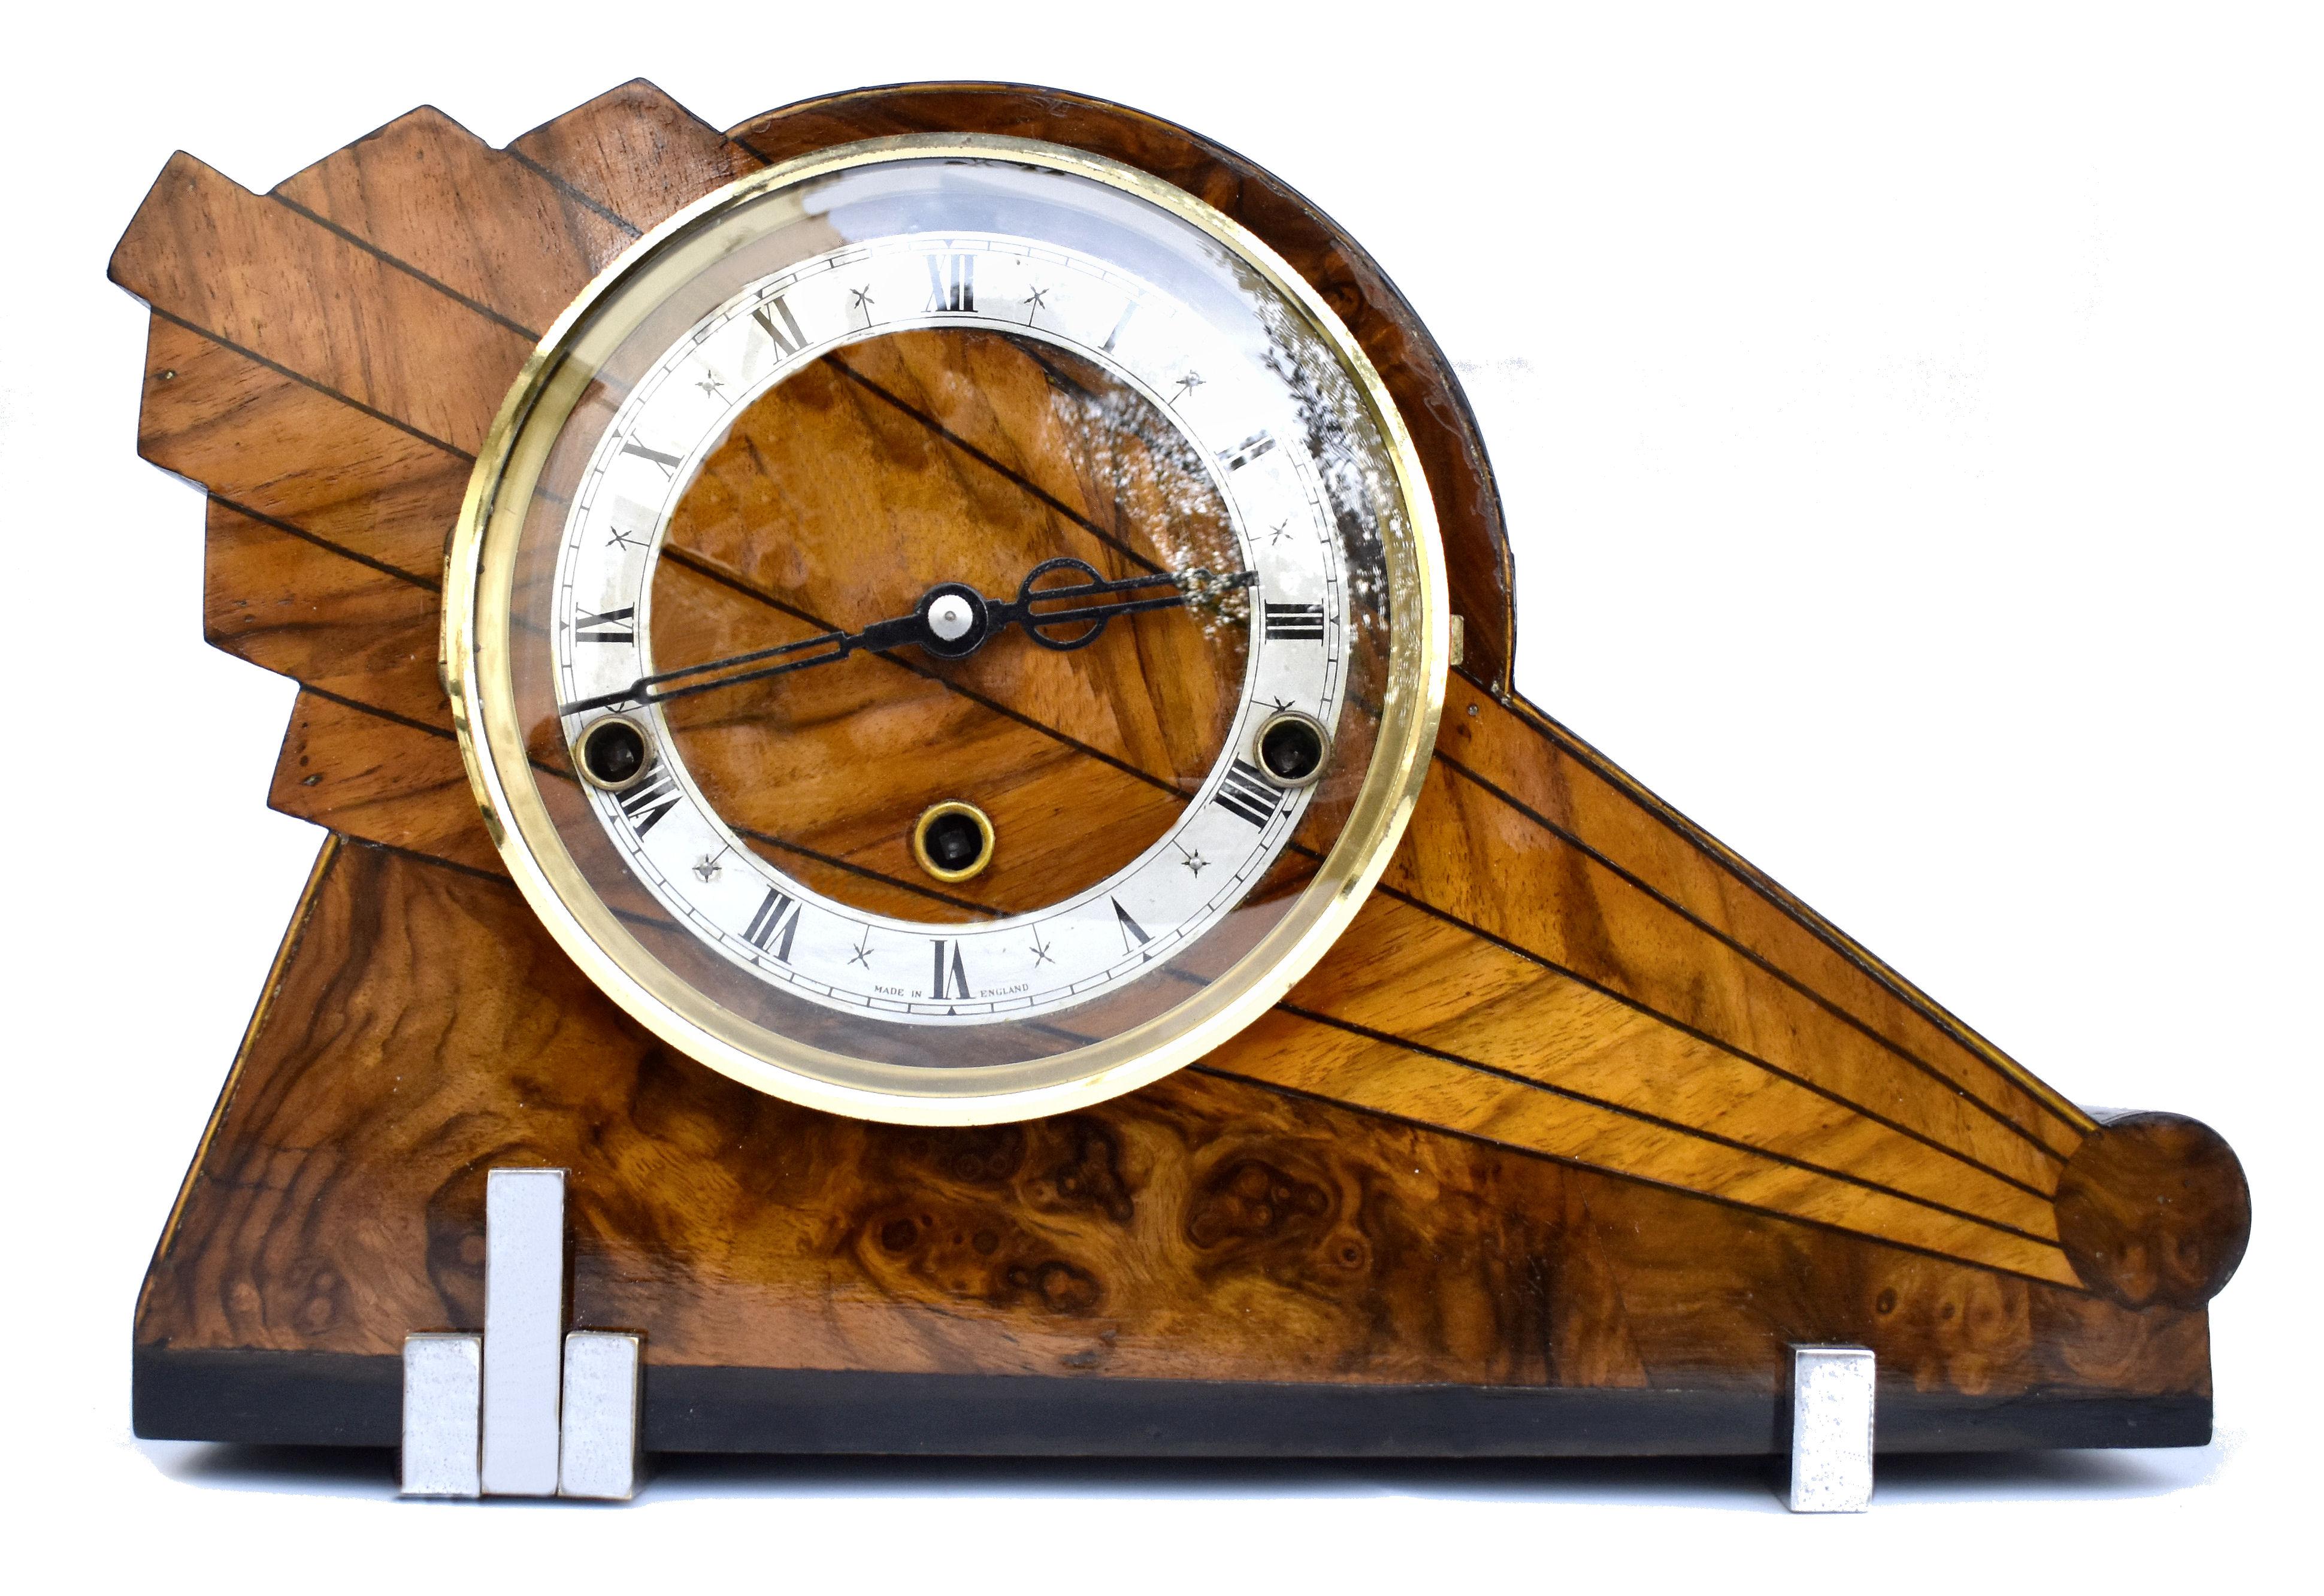 20th Century Art Deco Westminster Chime Mantle Clock, c1930